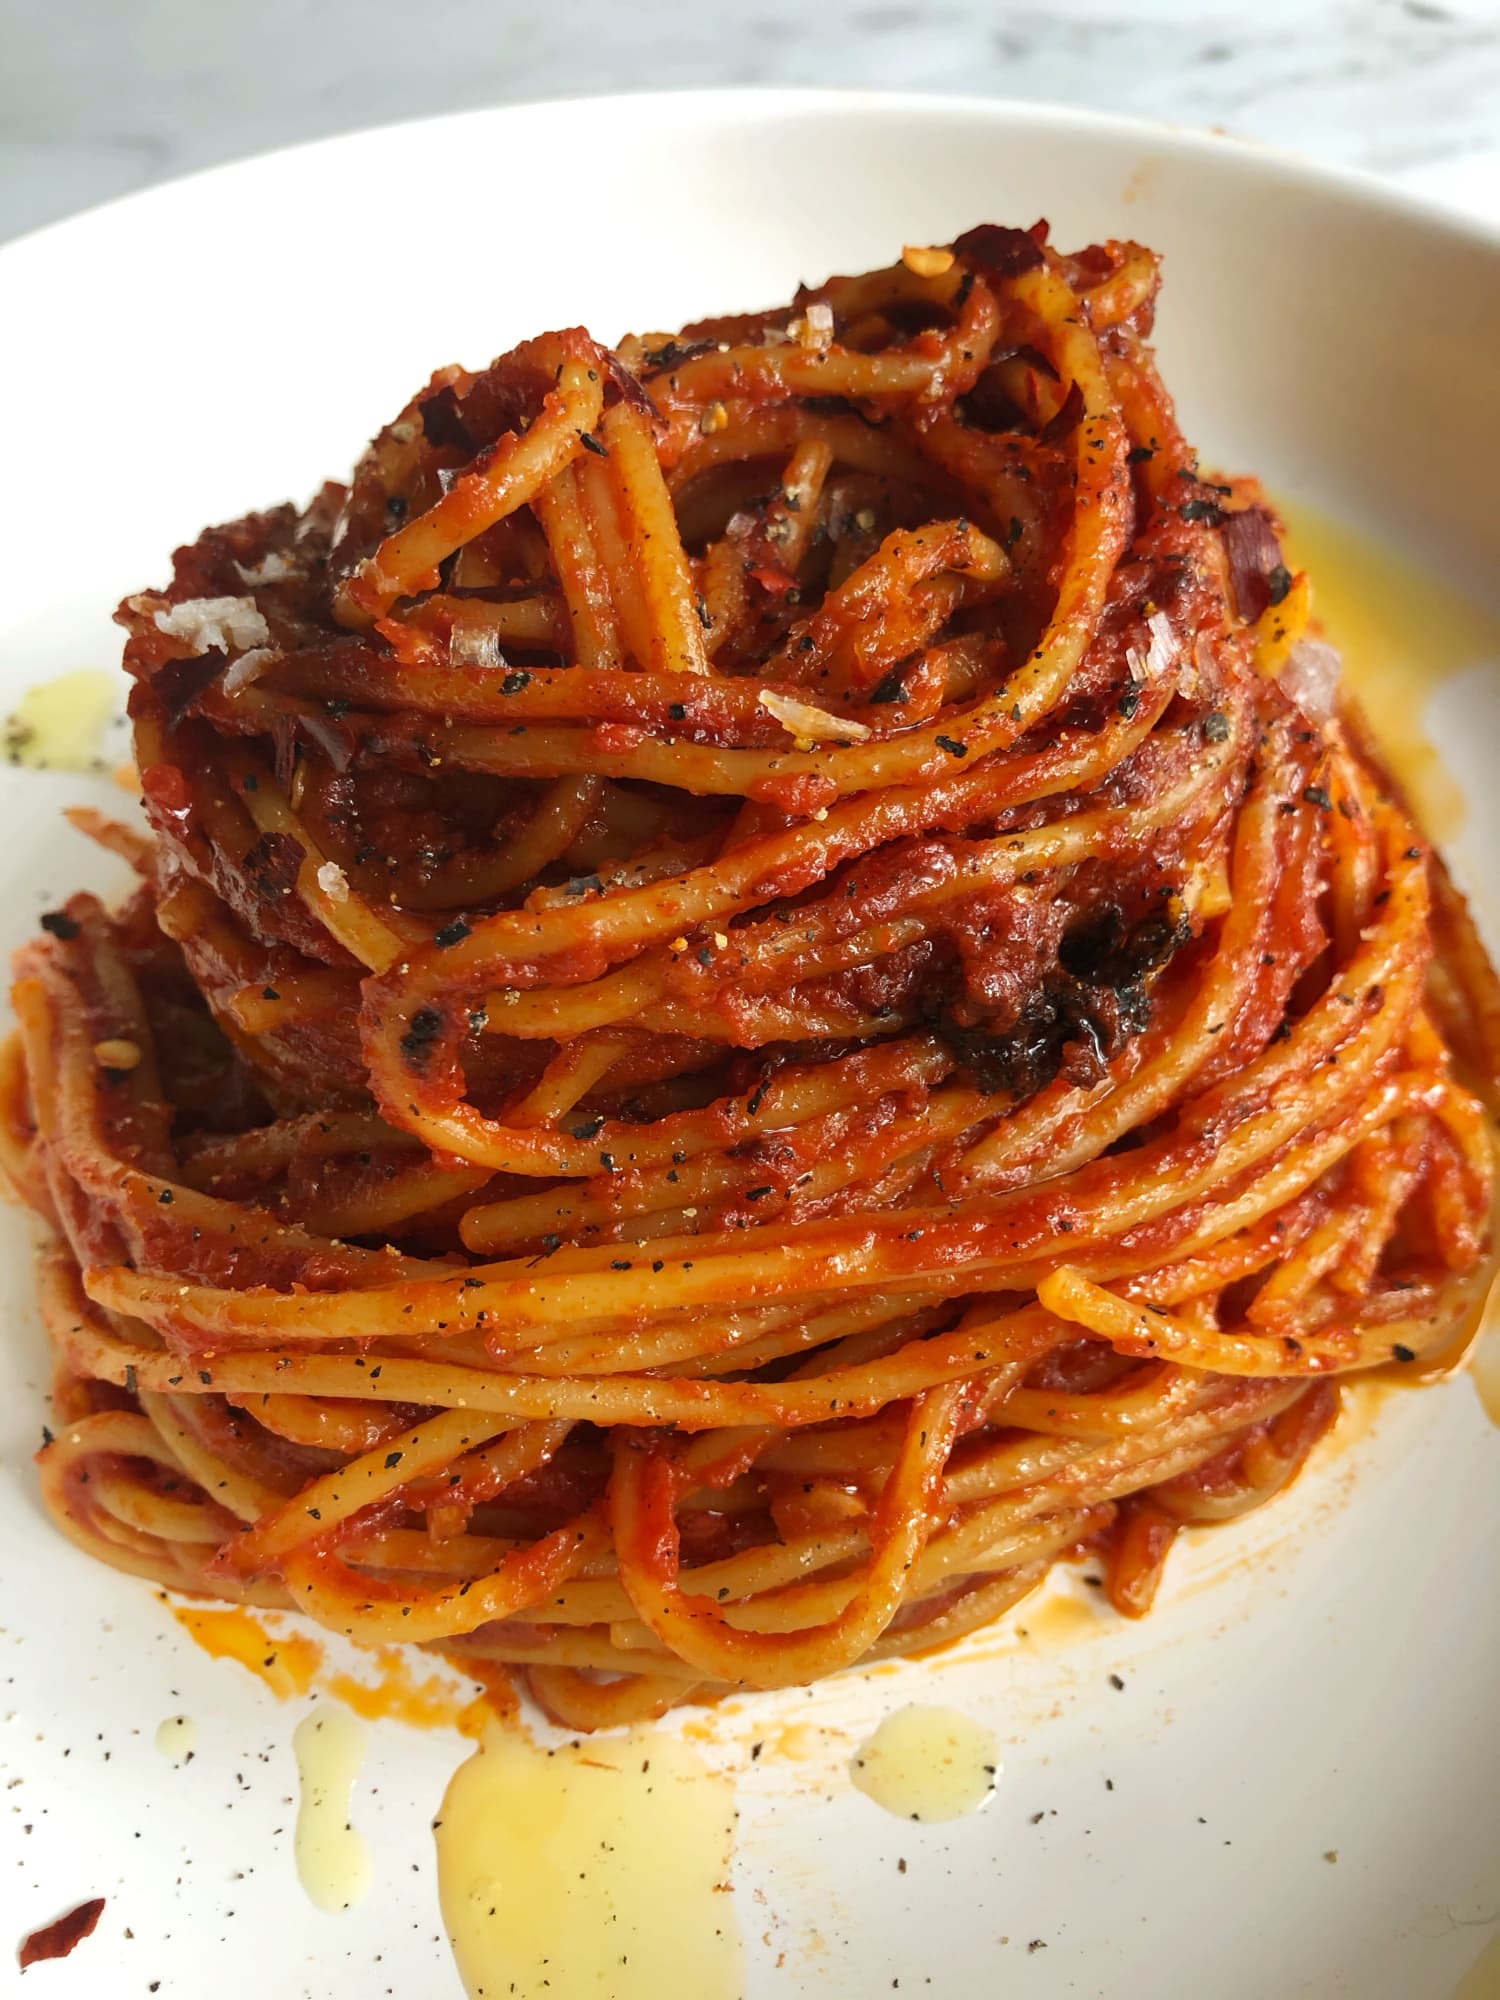 This Viral Spaghetti Recipe Is So Good It Doesn’t Even Need Cheese